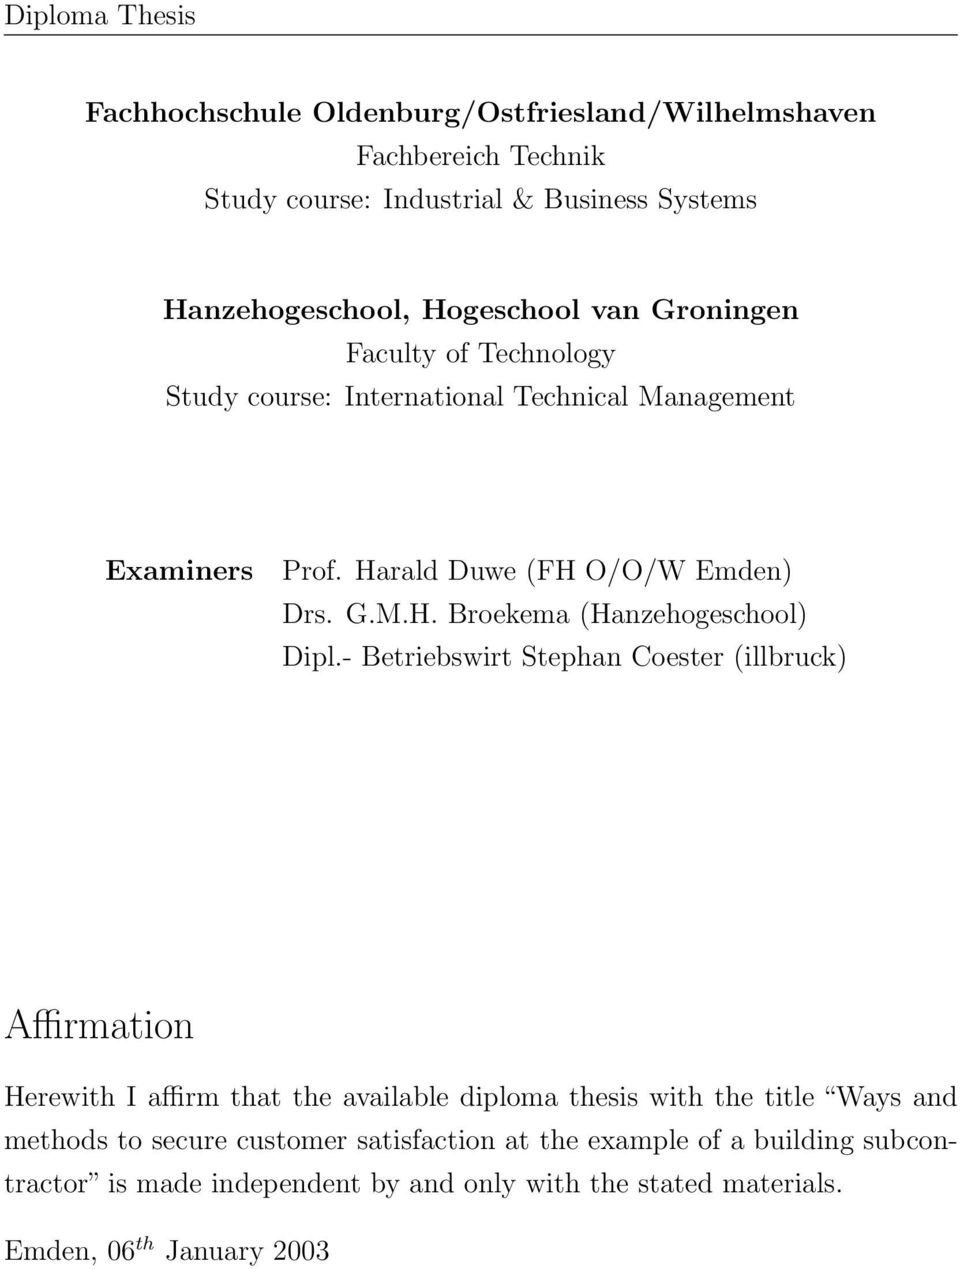 - Betriebswirt Stephan Coester (illbruck) Affirmation Herewith I affirm that the available diploma thesis with the title Ways and methods to secure customer